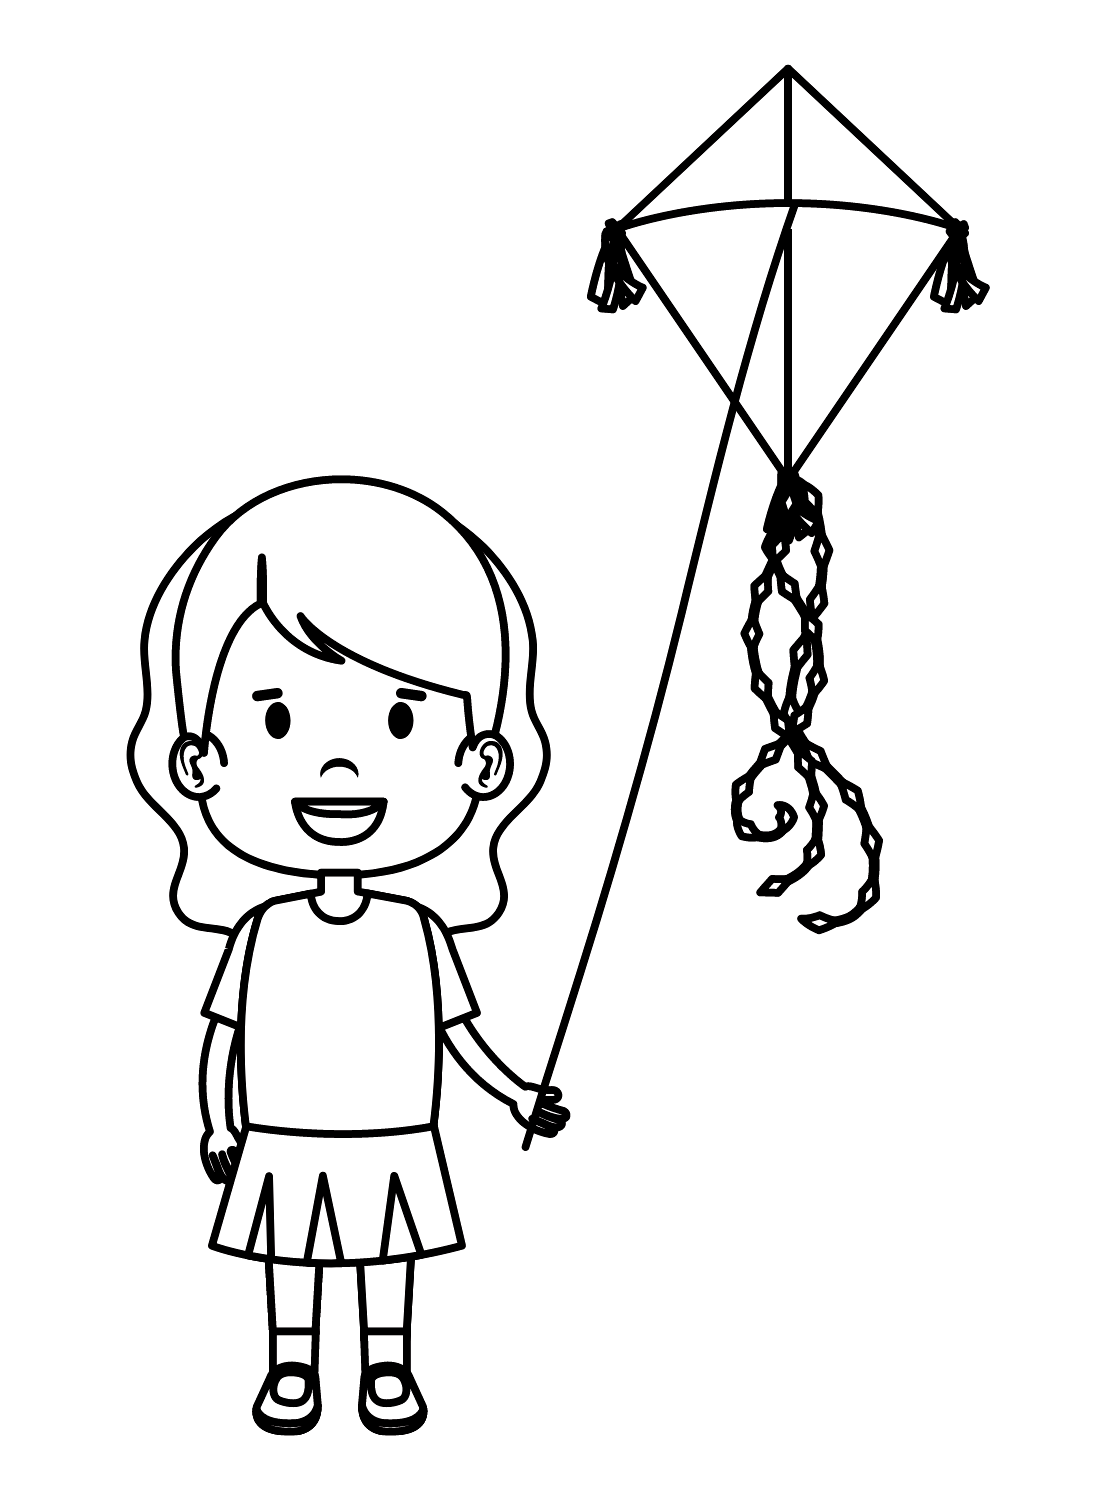 Girl Flying Kite Coloring Page